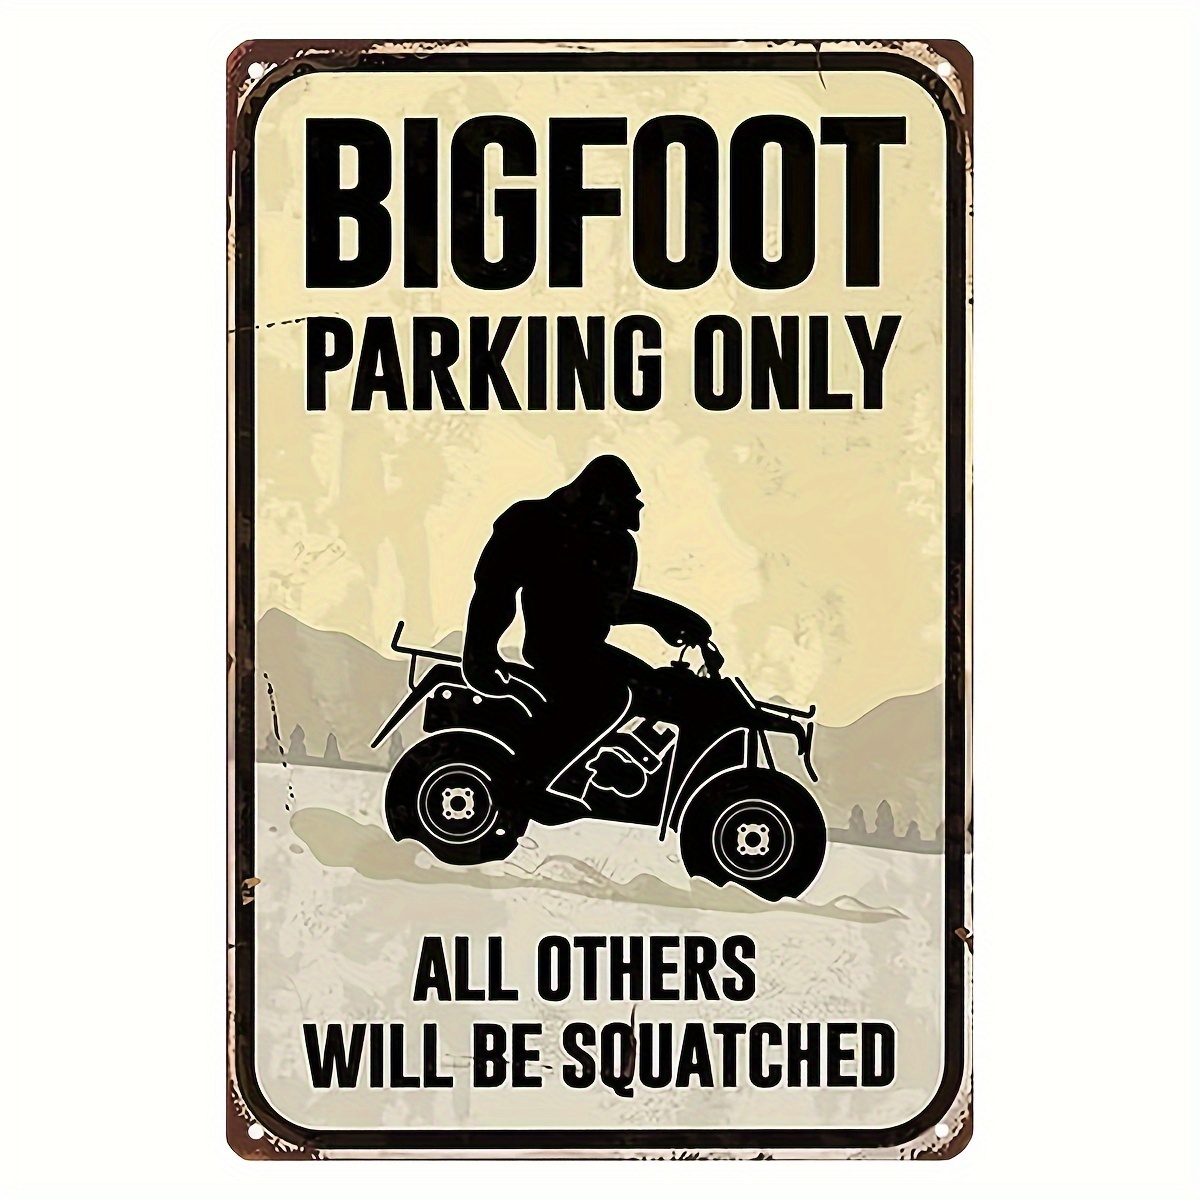 

Vintage Sasquatch On Atv Parking Only Metal Sign - Rustic Wall Decor For Home, Bar, Cafe, 8x12 Inches